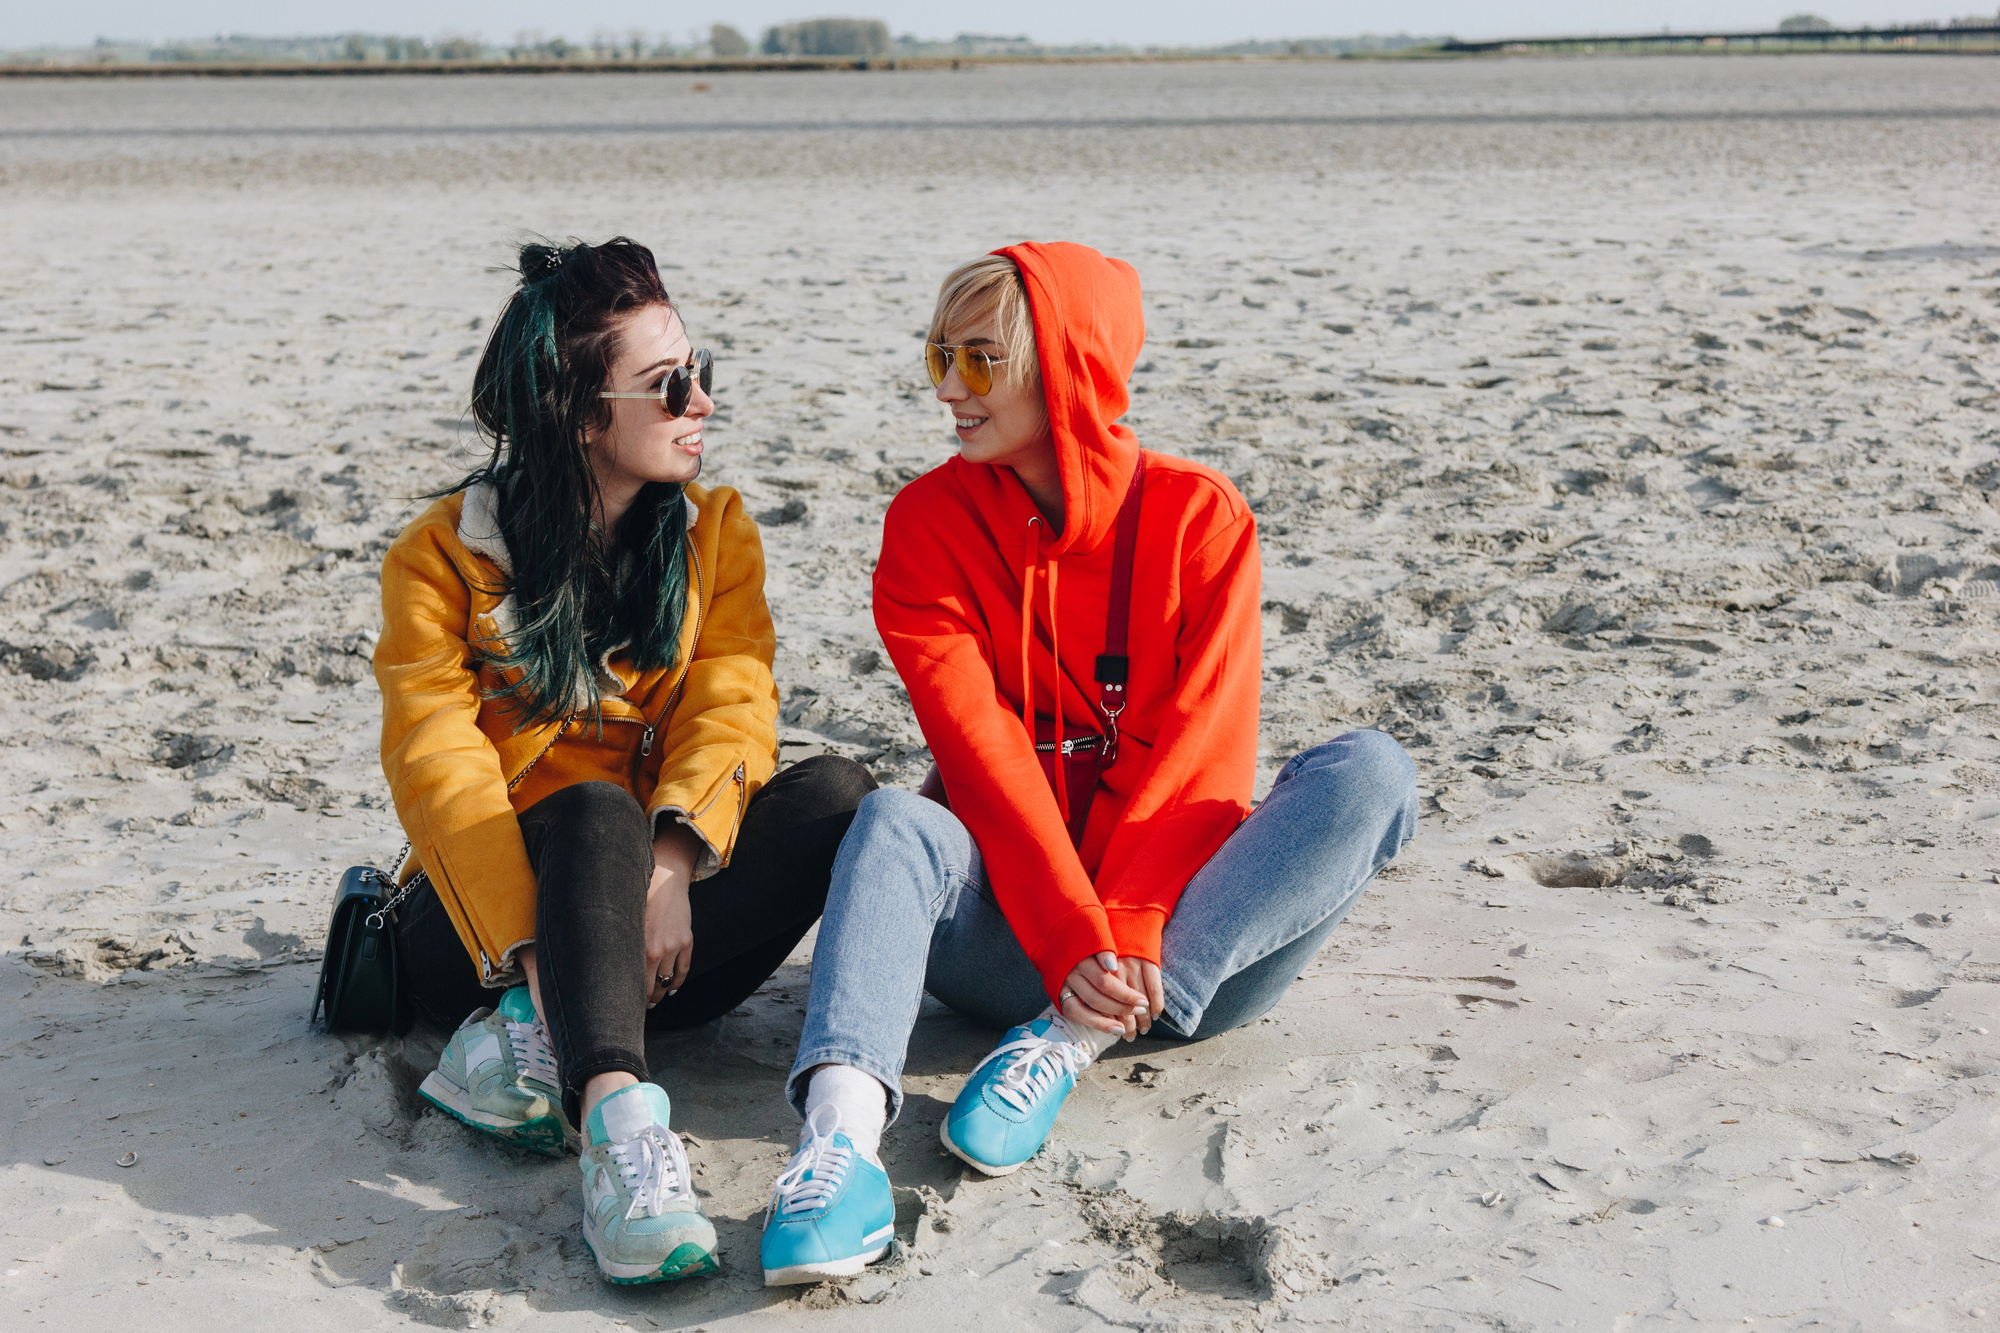 Two people sit on a sandy beach, facing each other and smiling. One wears a yellow jacket, black pants, and has dark hair, while the other wears a bright red hoodie, blue jeans, and has blond hair. The background features a wide expanse of sand and a distant horizon.